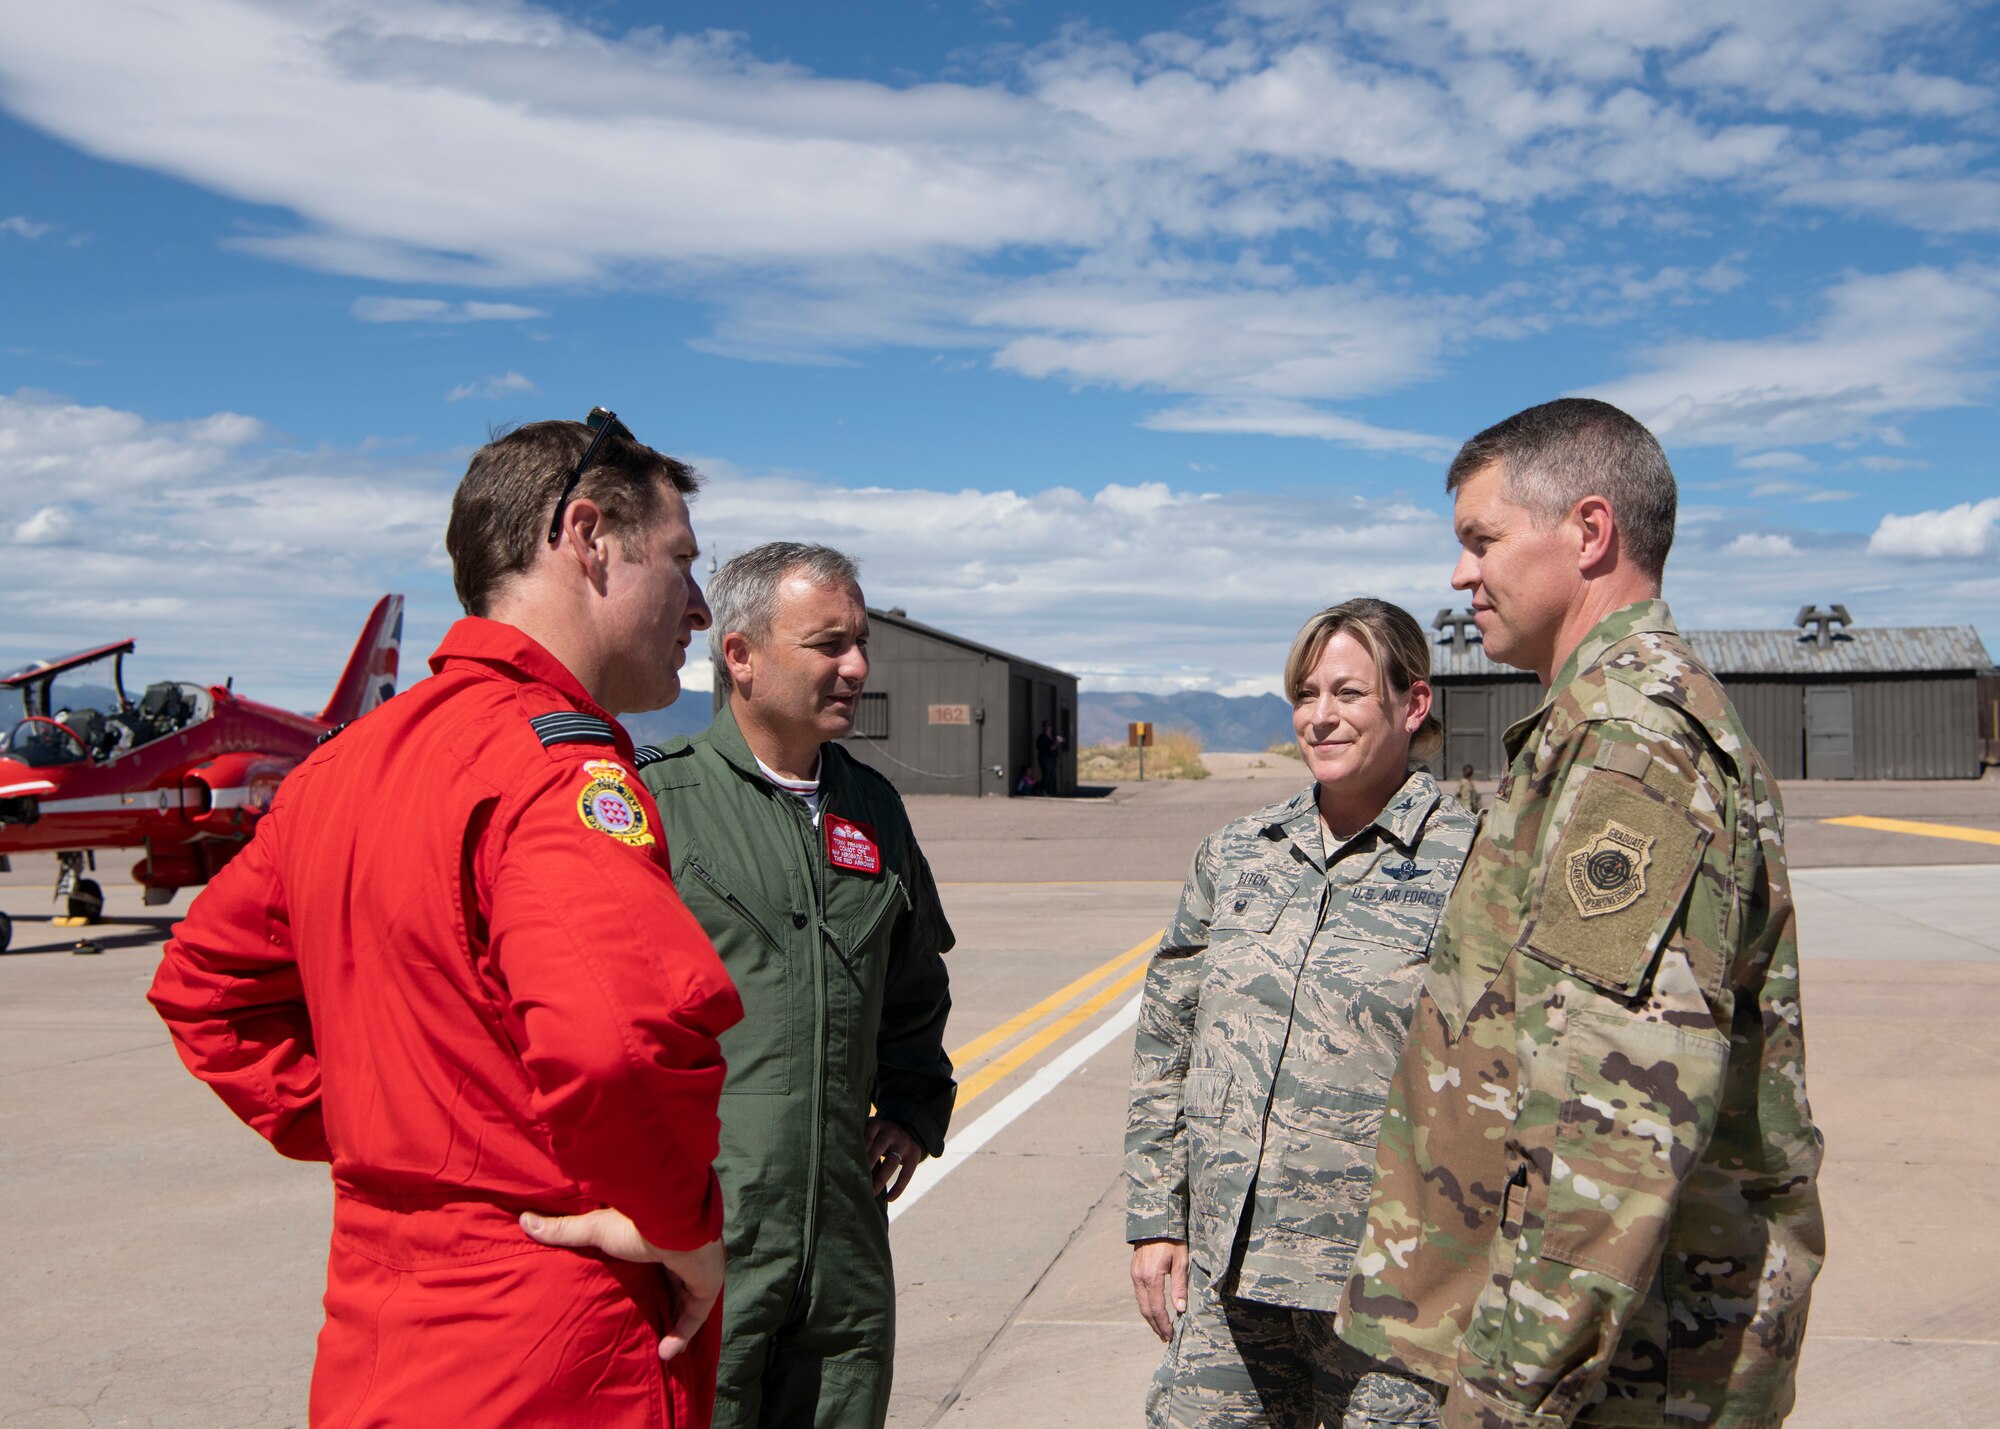 From left, Wing Commander Andrew Keith and Group Captain Tony Franklin, Royal Air Force, meet Col. Jennifer Fitch, individual mobilization augmentee to the 21st Space Wing commander, and Col. Sam Johnson, 21st Space Wing vice commander Sept. 16, 2019 at Peterson Air Force Base, Colorado. Keith and Franklin were visiting with the Red Arrows, the Royal Air Force aerial demonstration team during the team’s North American tour. (U.S. Air Force photo by Heather Heiney)